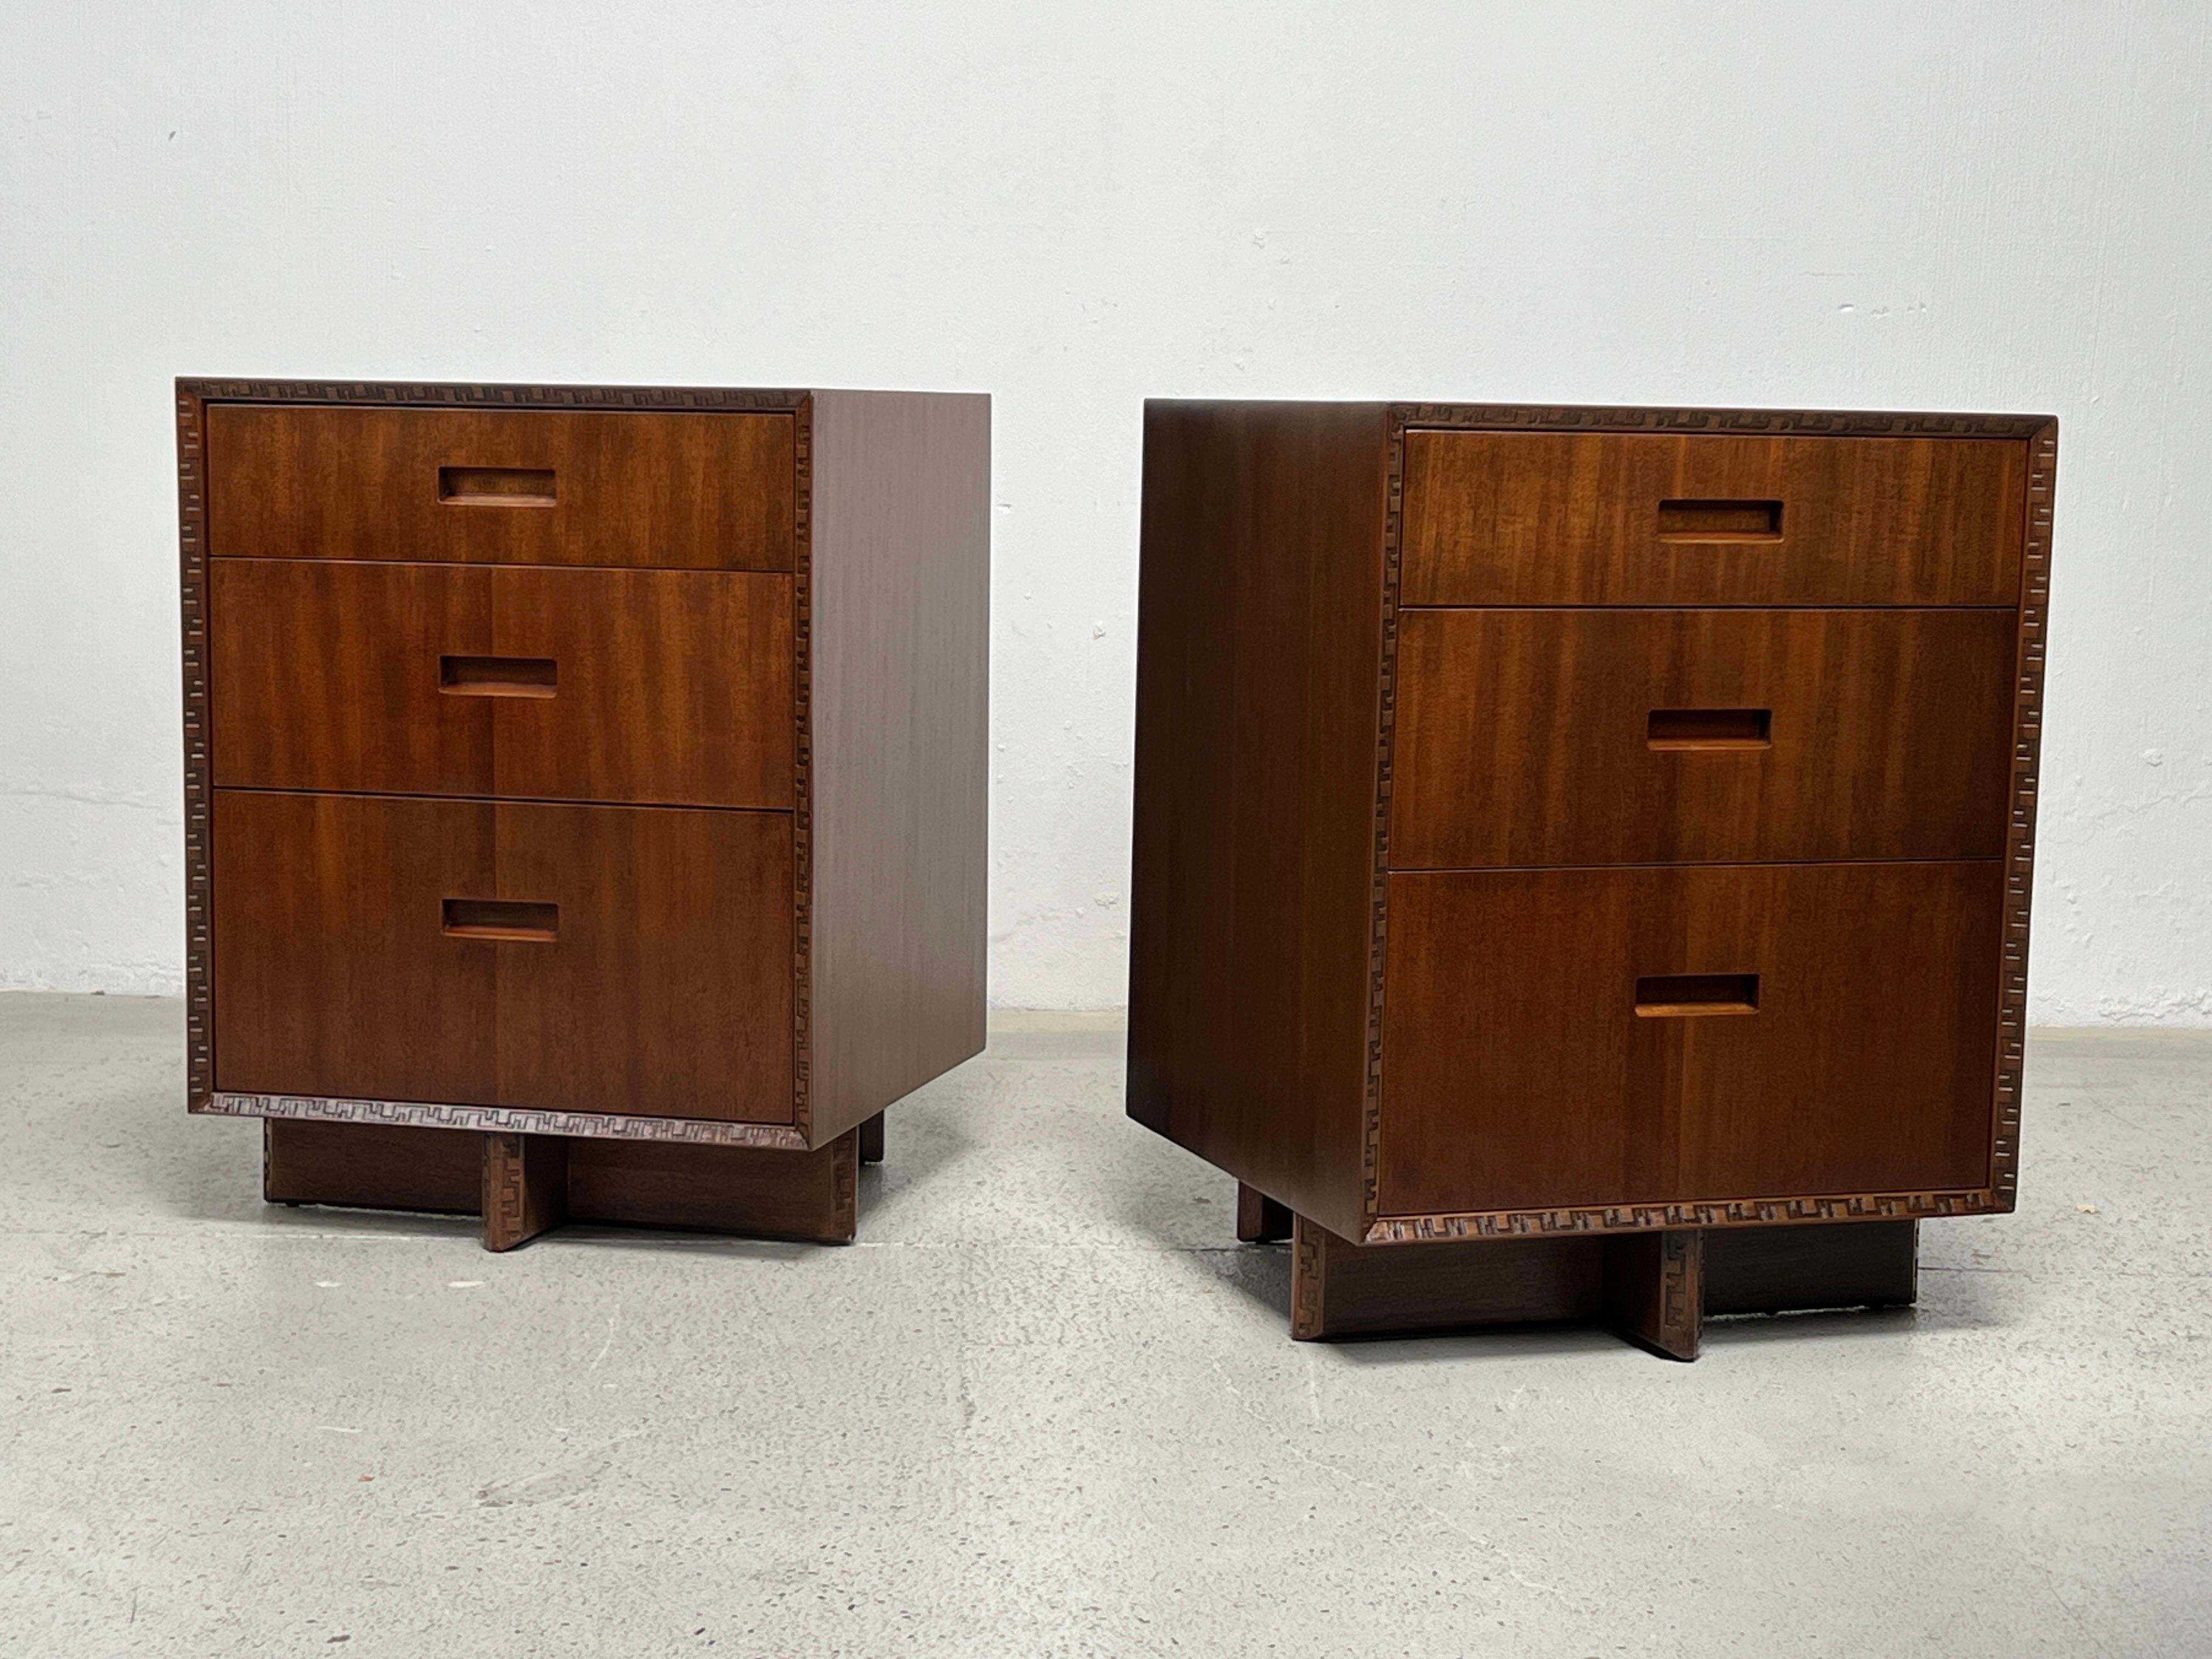 A pair of mahogany three drawer chests or nightstands designed by Frank Lloyd Wright for Henredon.